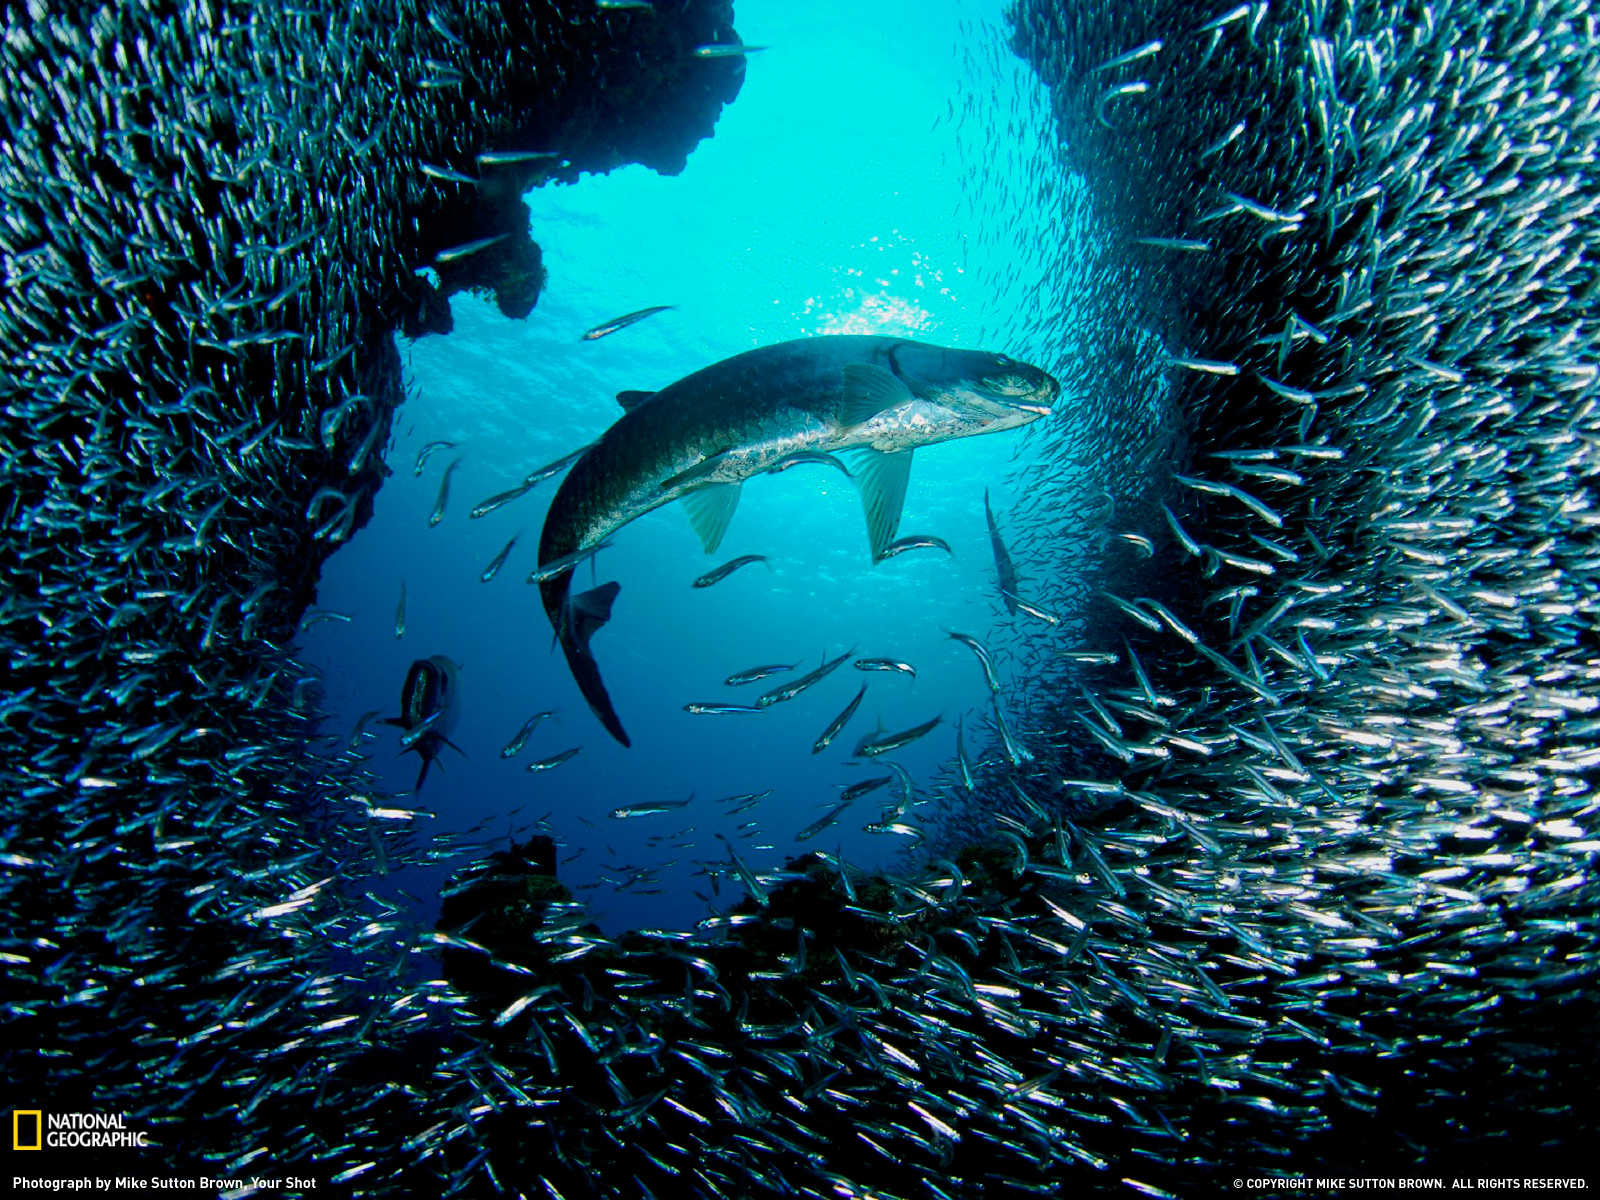 Wallpaperspiolt: National Geographic aquatic life live hd Wallpapers